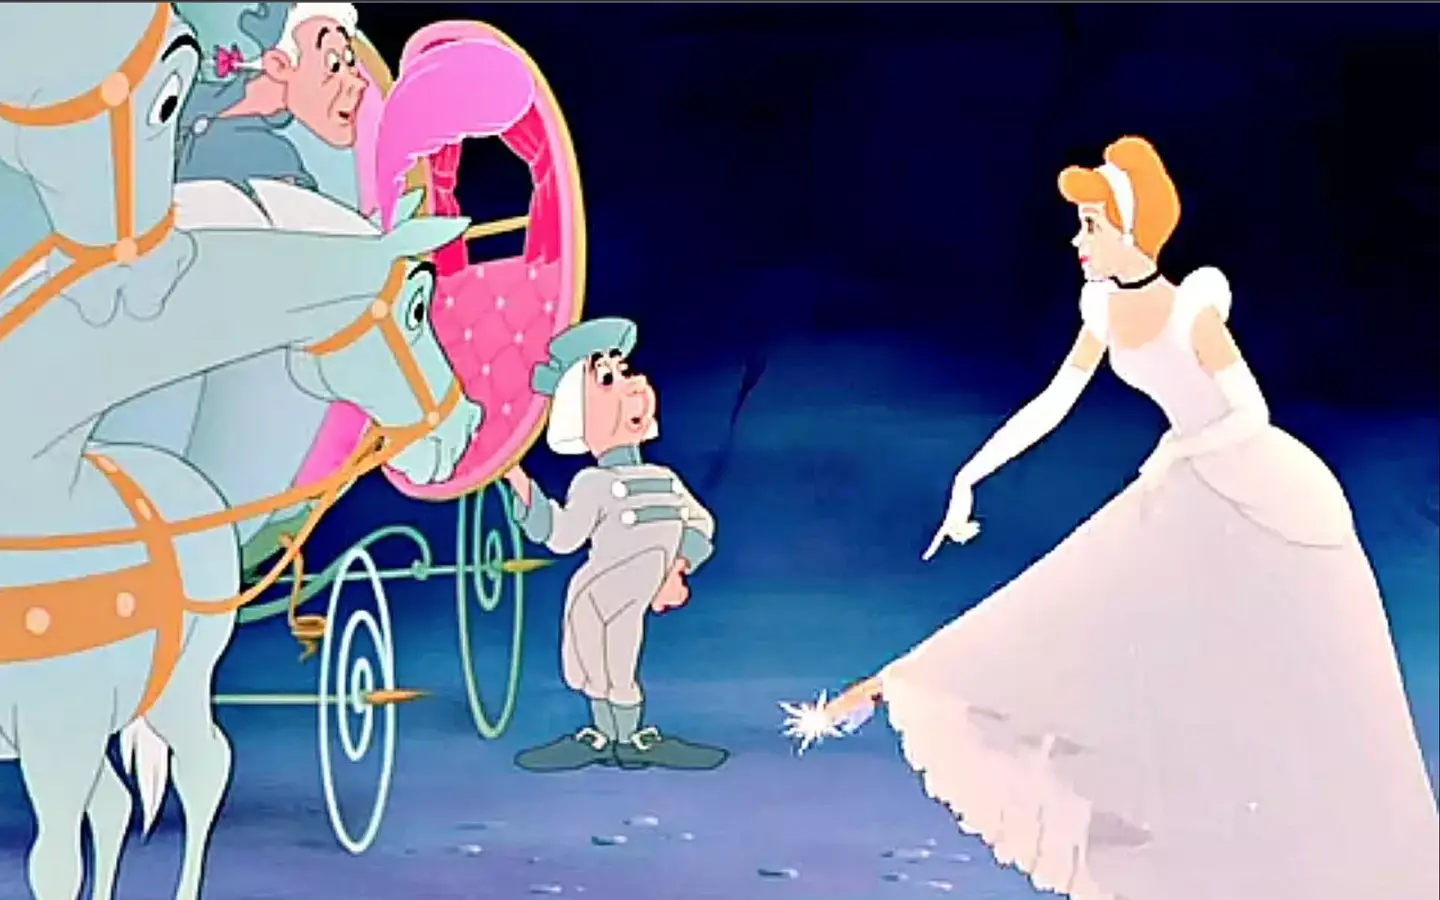 Others asked why Cinderella's shoes fell off if they were meant fit so well (